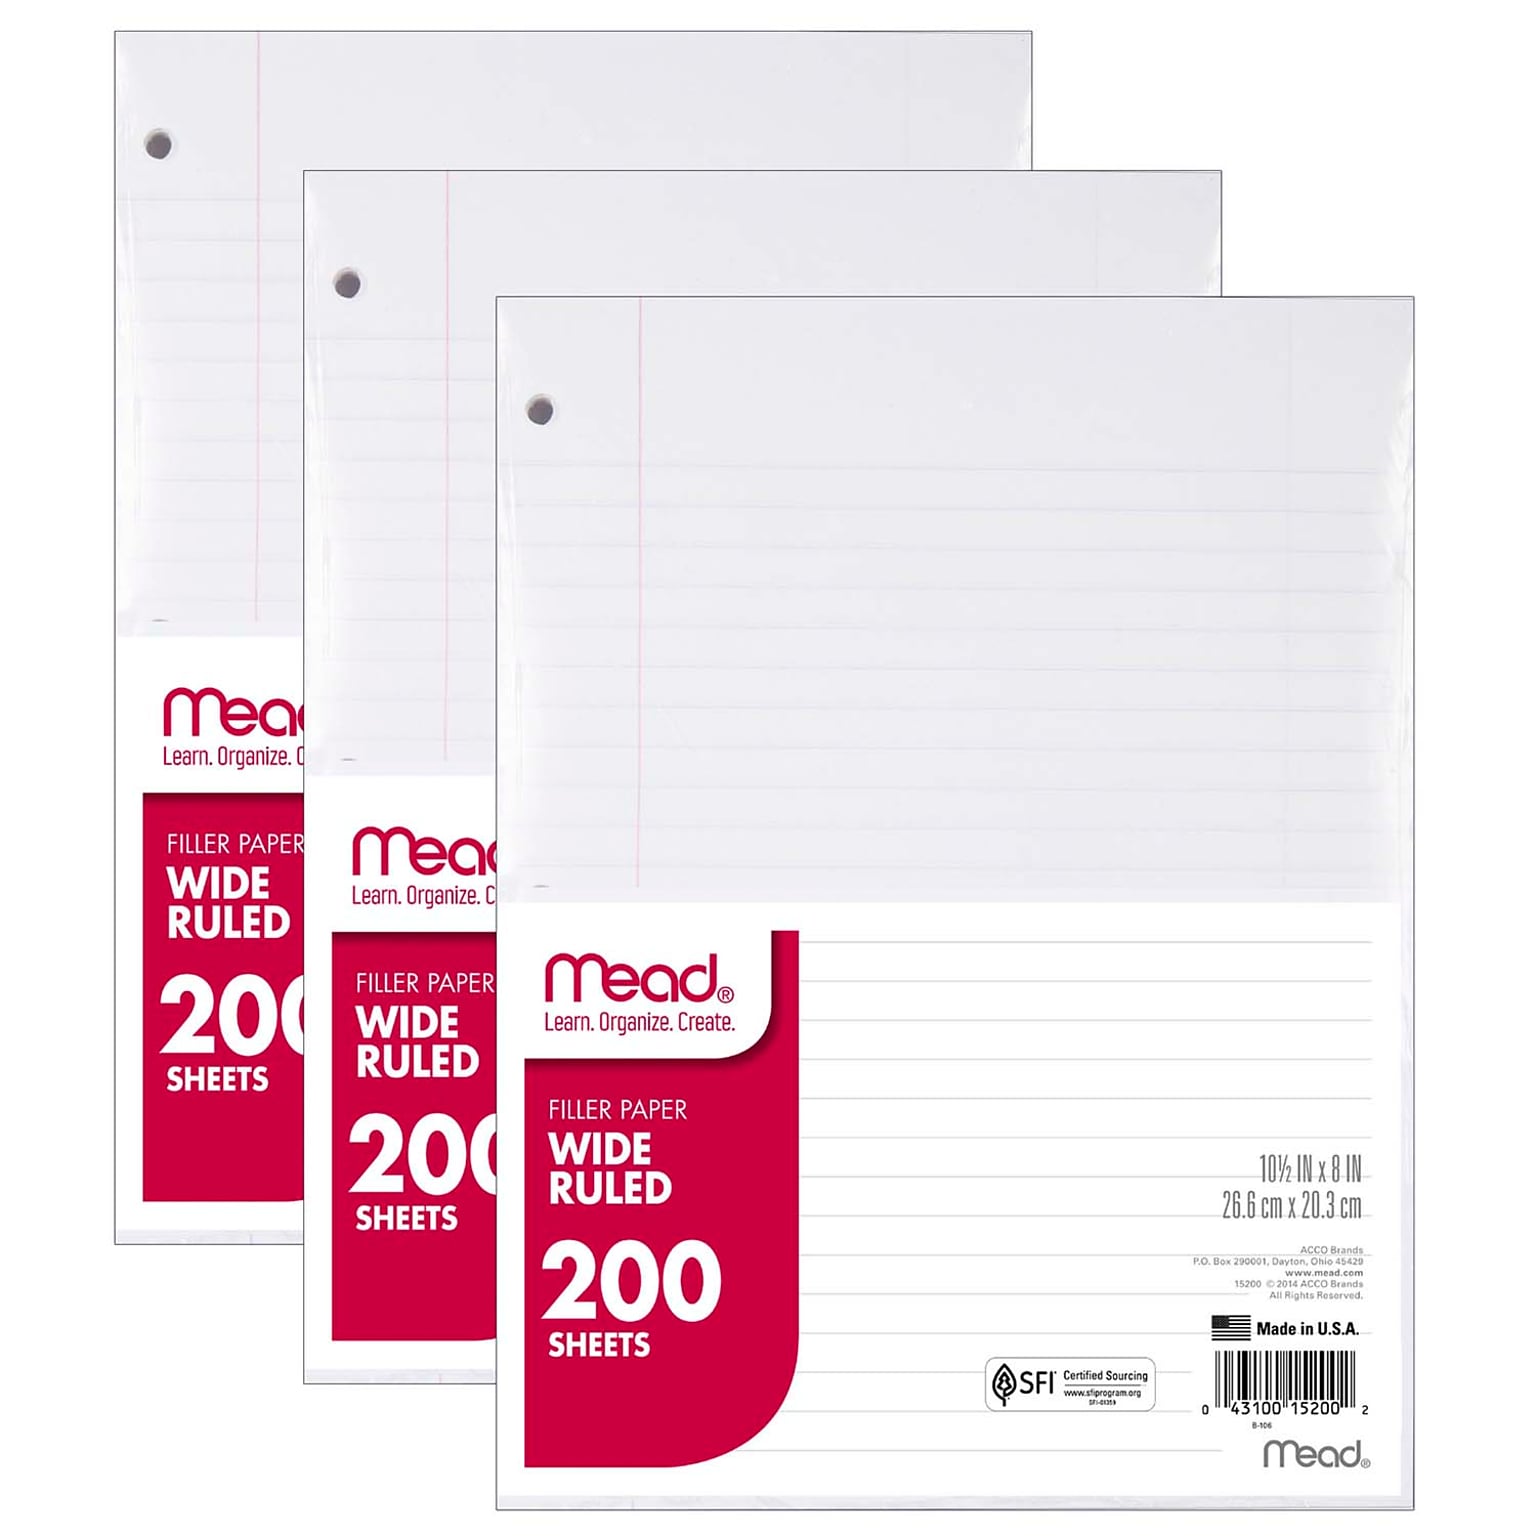 Mead Wide Ruled Filler Paper, 10.5 x 8, White, 200 Sheets/Pack, 3 Packs (MEA15200-3)